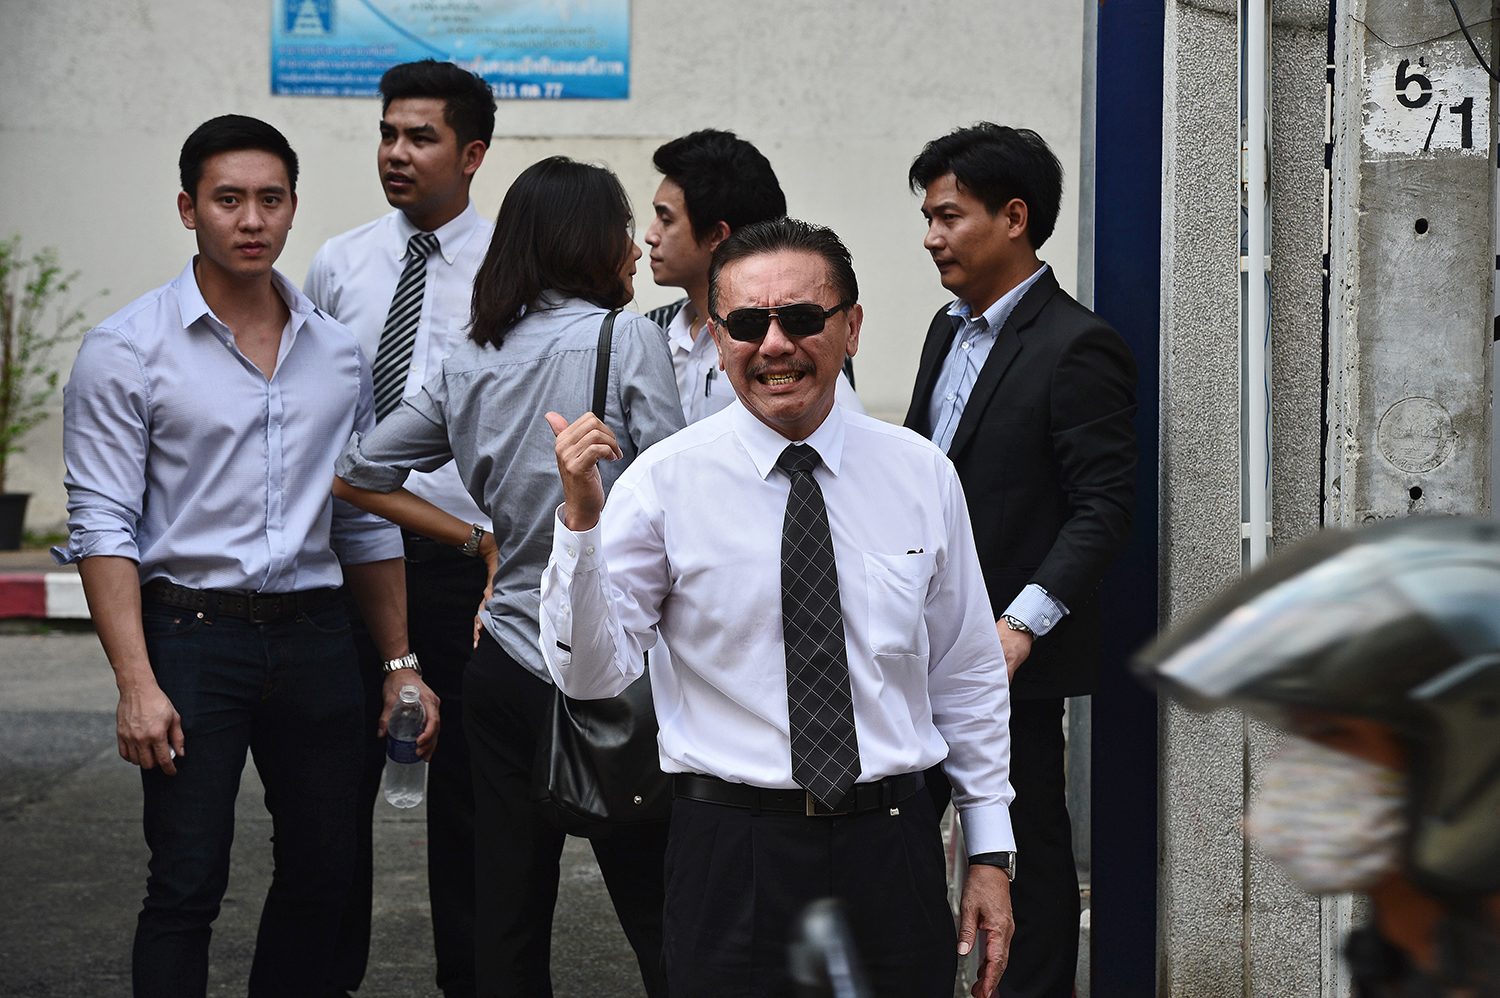 Thai massage parlour impresario turned politician Chuwit Kamolvisit (C) gestures as he waits for a hearing outside a criminal court in Bangkok on October 15, 2015. Chuwit appeared in court on October 15 over accusations he and his associates demolished a group of bars in the heart of Bangkokís nightlife in 2003. If found guilty Chuwit could face up to five years in jail. AFP PHOTO / Christophe ARCHAMBAULT / AFP PHOTO / CHRISTOPHE ARCHAMBAULT